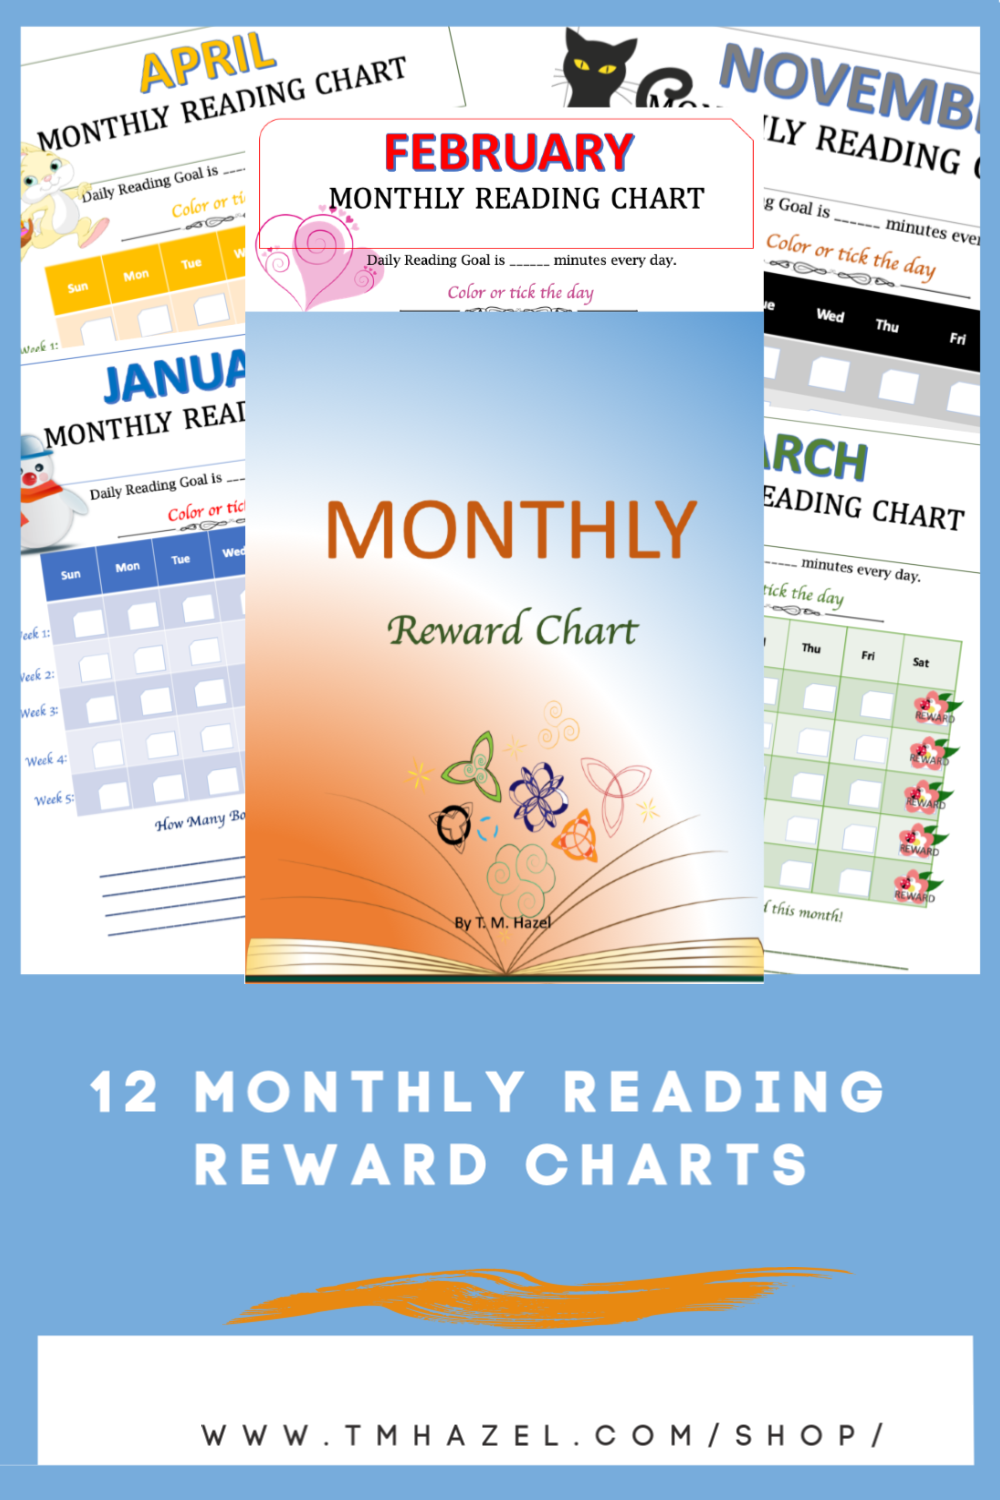 12 monthly reading reward charts